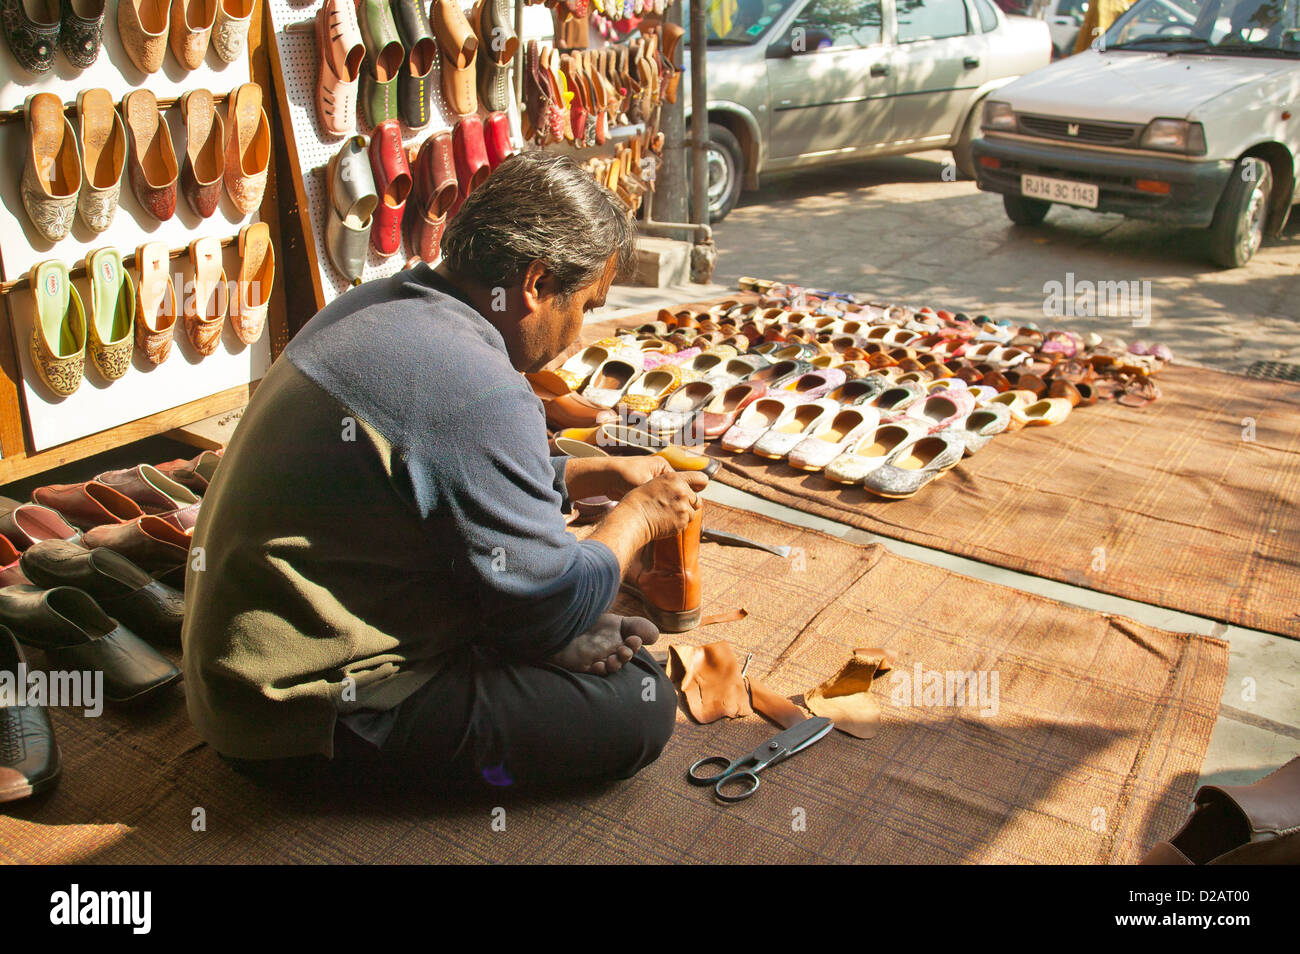 OPEN AIR SHOEMAKER IN JAIPUR RAJASTHAN INDIA Stock Photo